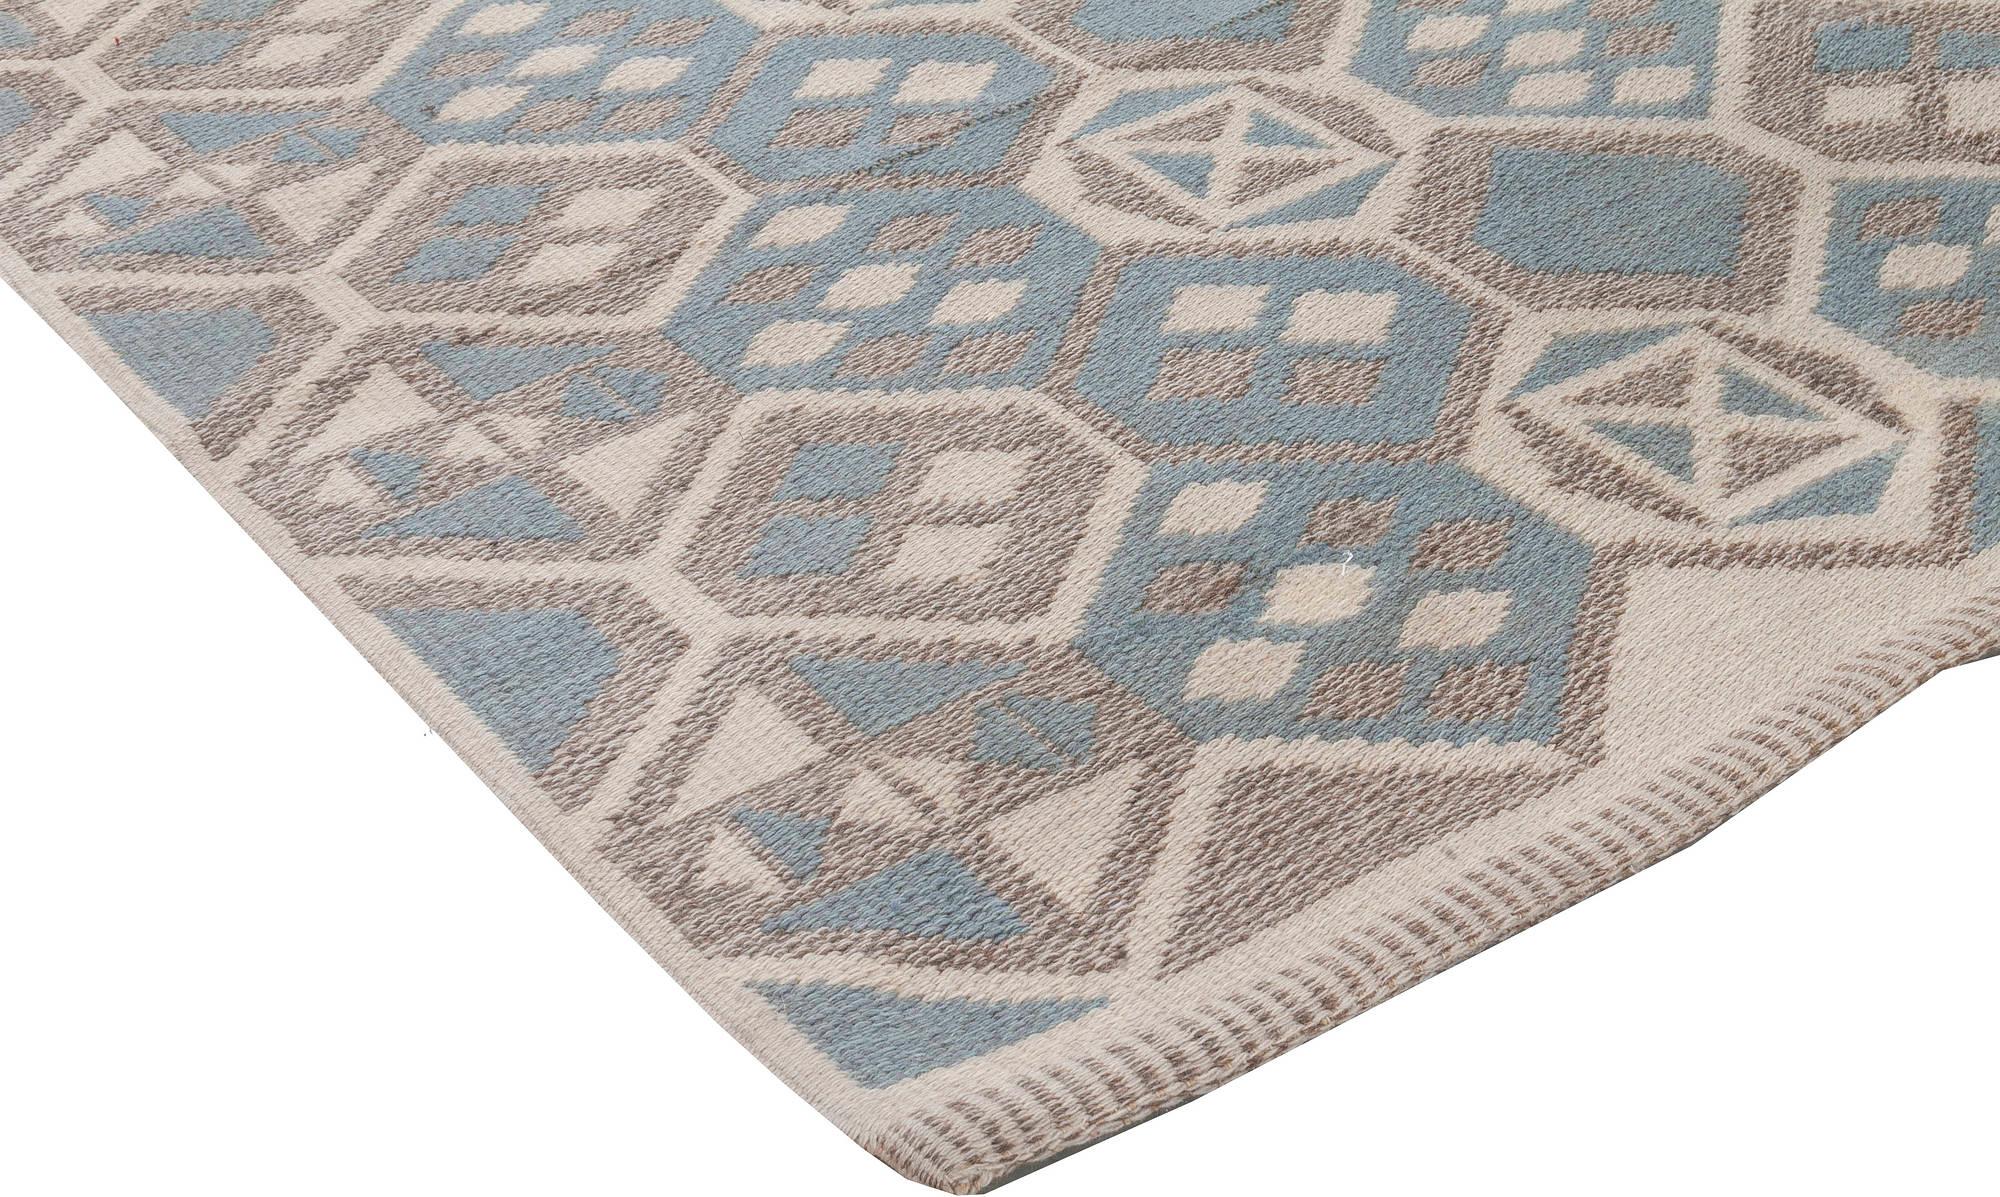 Midcentury Scandinavian Geometric Handmade Wool Rug In Good Condition For Sale In New York, NY